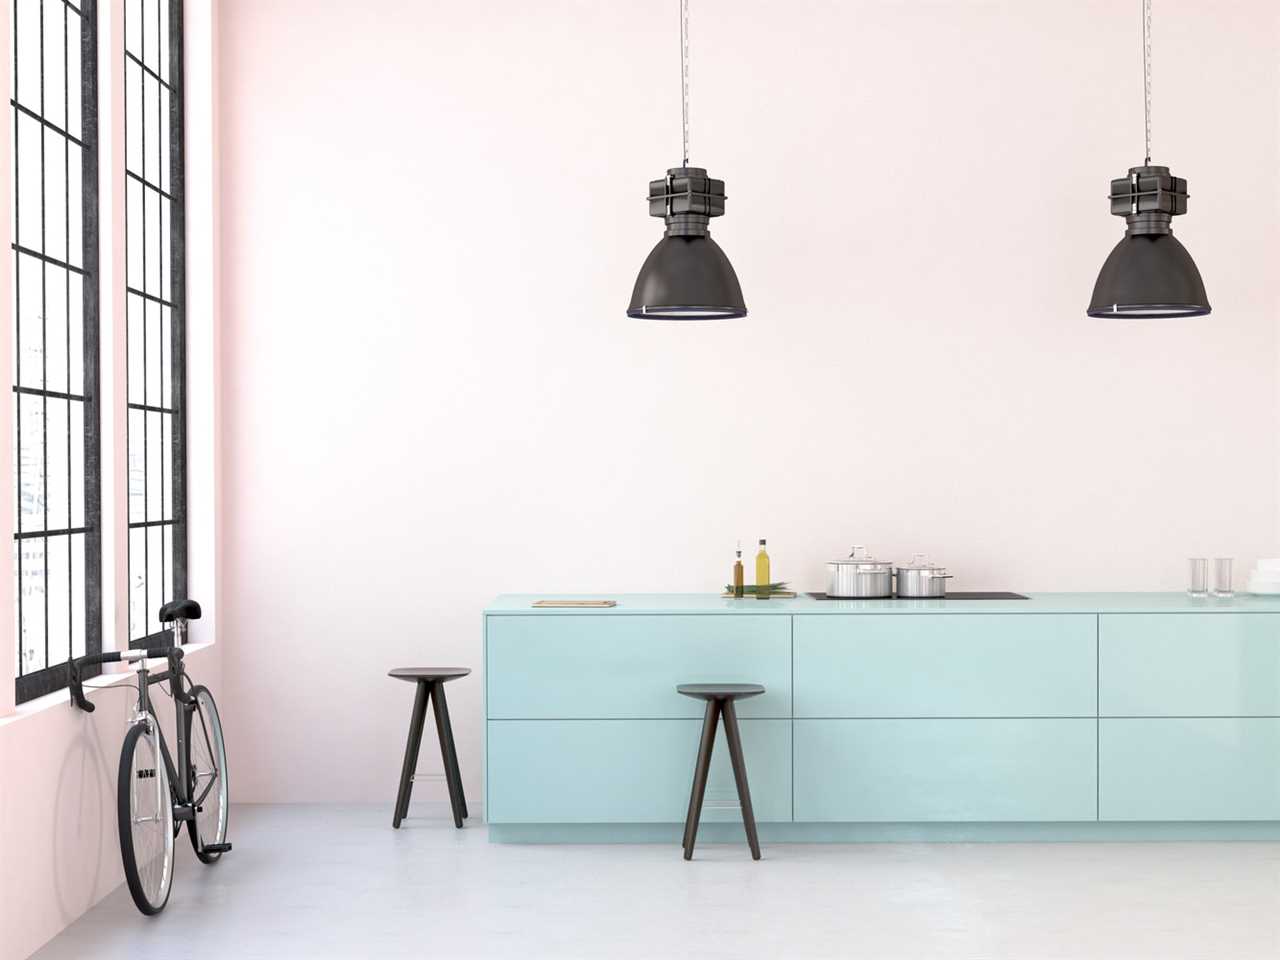 Craft a Scandinavian Kitchen With a Harmonious Balance of Form and Function